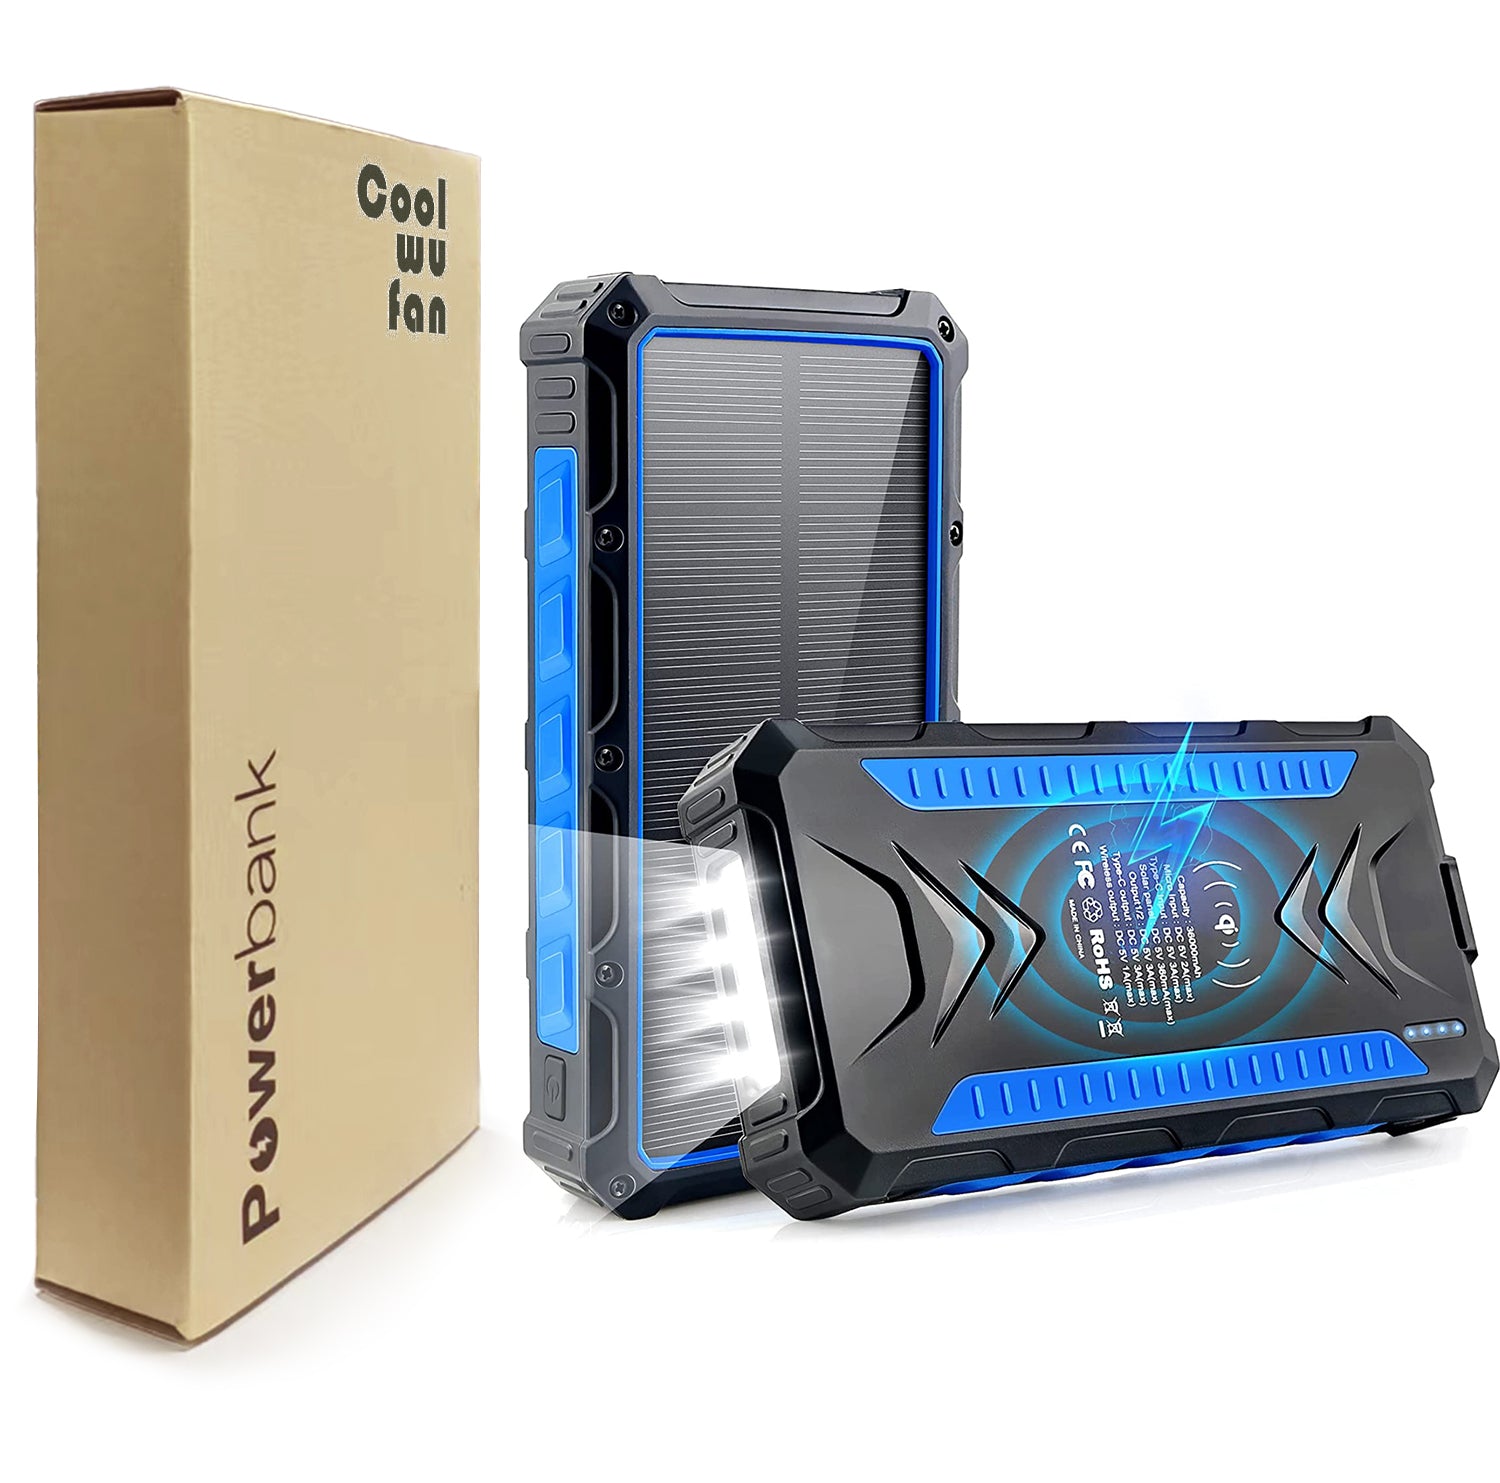 COOLWUFAN 36000mAh Solar Power Bank, Qi Wireless Solar Portable Charger with LED Flashlights, Dual Outputs & Inputs Huge Capacity Battery Pack for Outdoor Activities Camera Cell Phones Consoles MP3 MP4